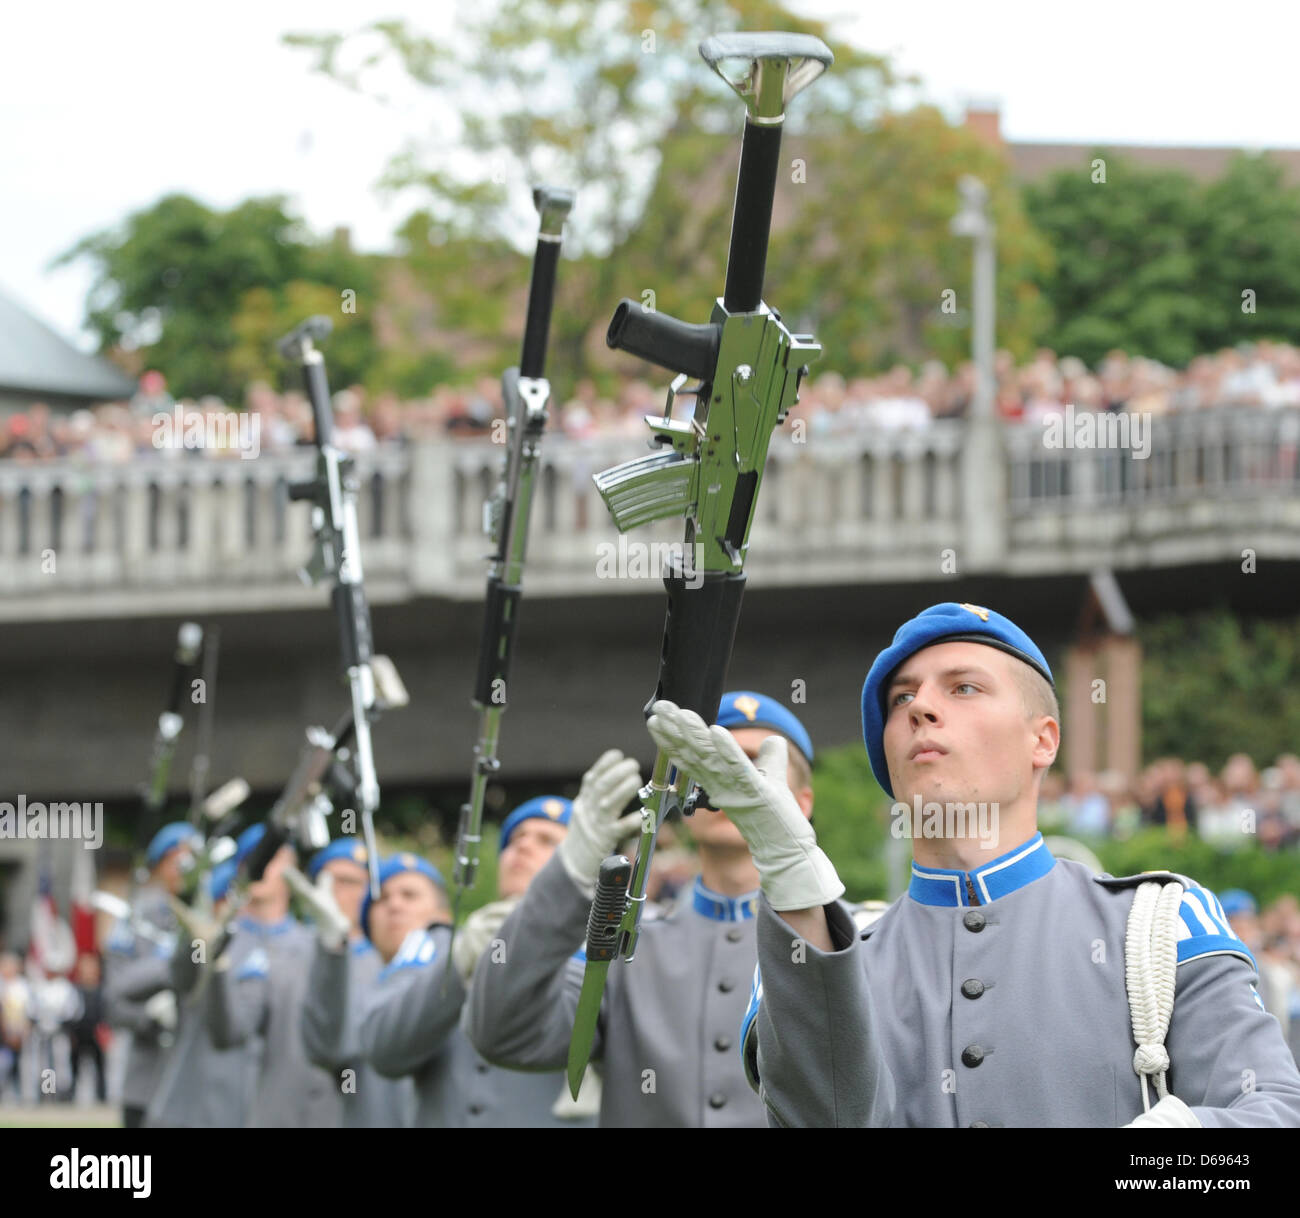 The band 'Conscript Band of the Finnish Defence Forces' from Finland plays during the Basel-based military music festival 'Basel Tattoo's' visit to  Freiburg, Germany, 16 July 2012. 300 musicians from 4 continents participate in a parade. The festival runs from 13 to 21 July in Basel. Photo: PATRICK SEEGER Stock Photo